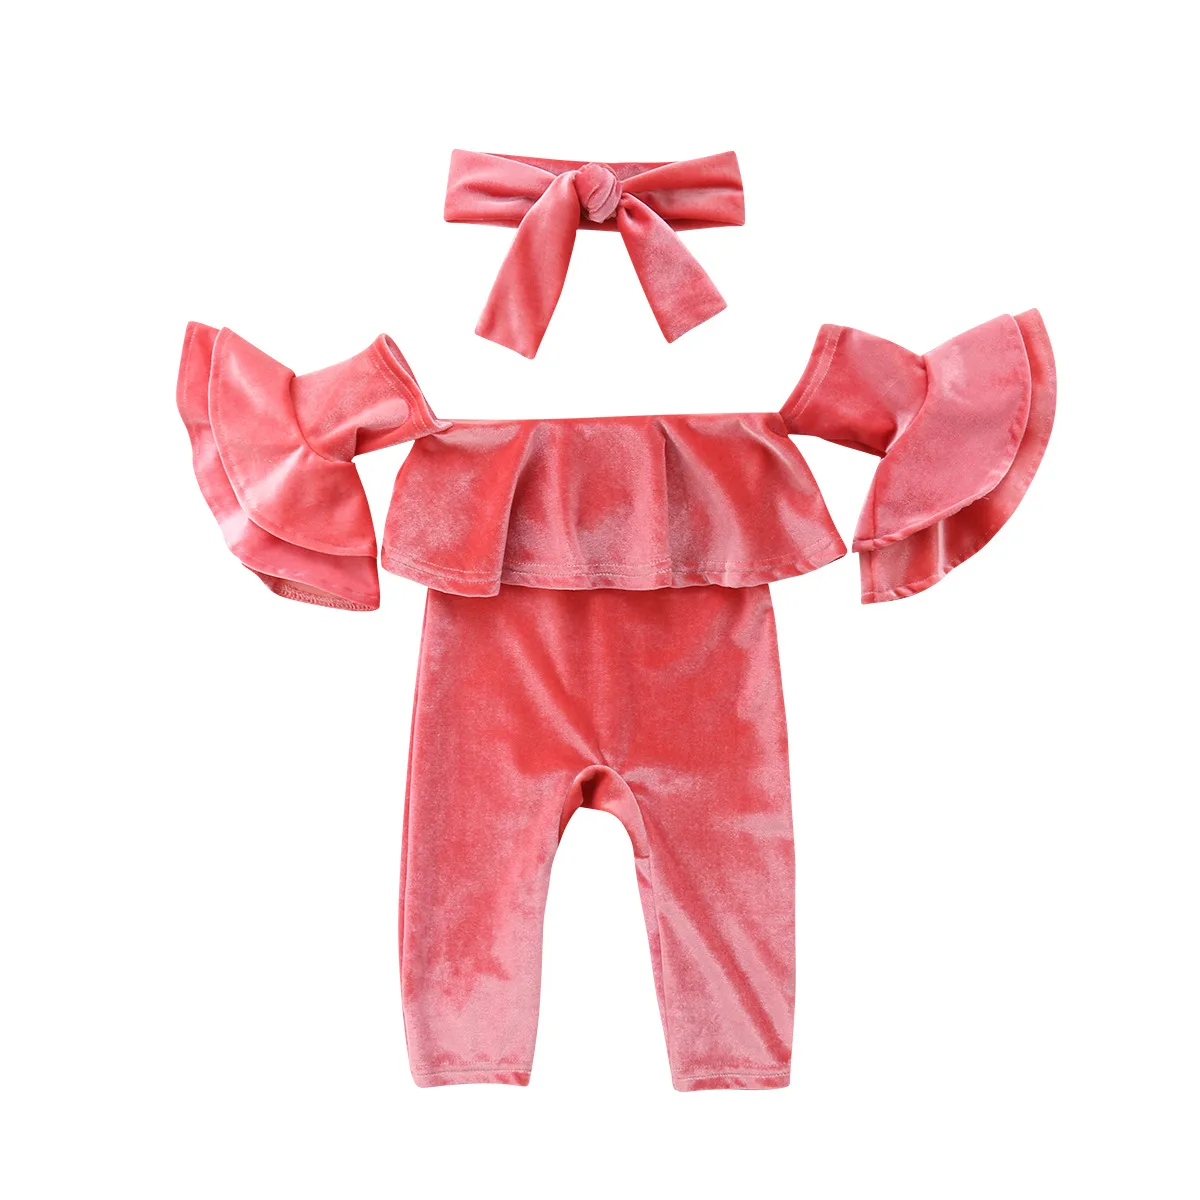 

2 Pcs New Fashion Toddler Kids Baby Girls Clothes Set Velvet Cotton Layers Flare Sleeve Romper Pink Jumpsuit Sunsuit Outfits